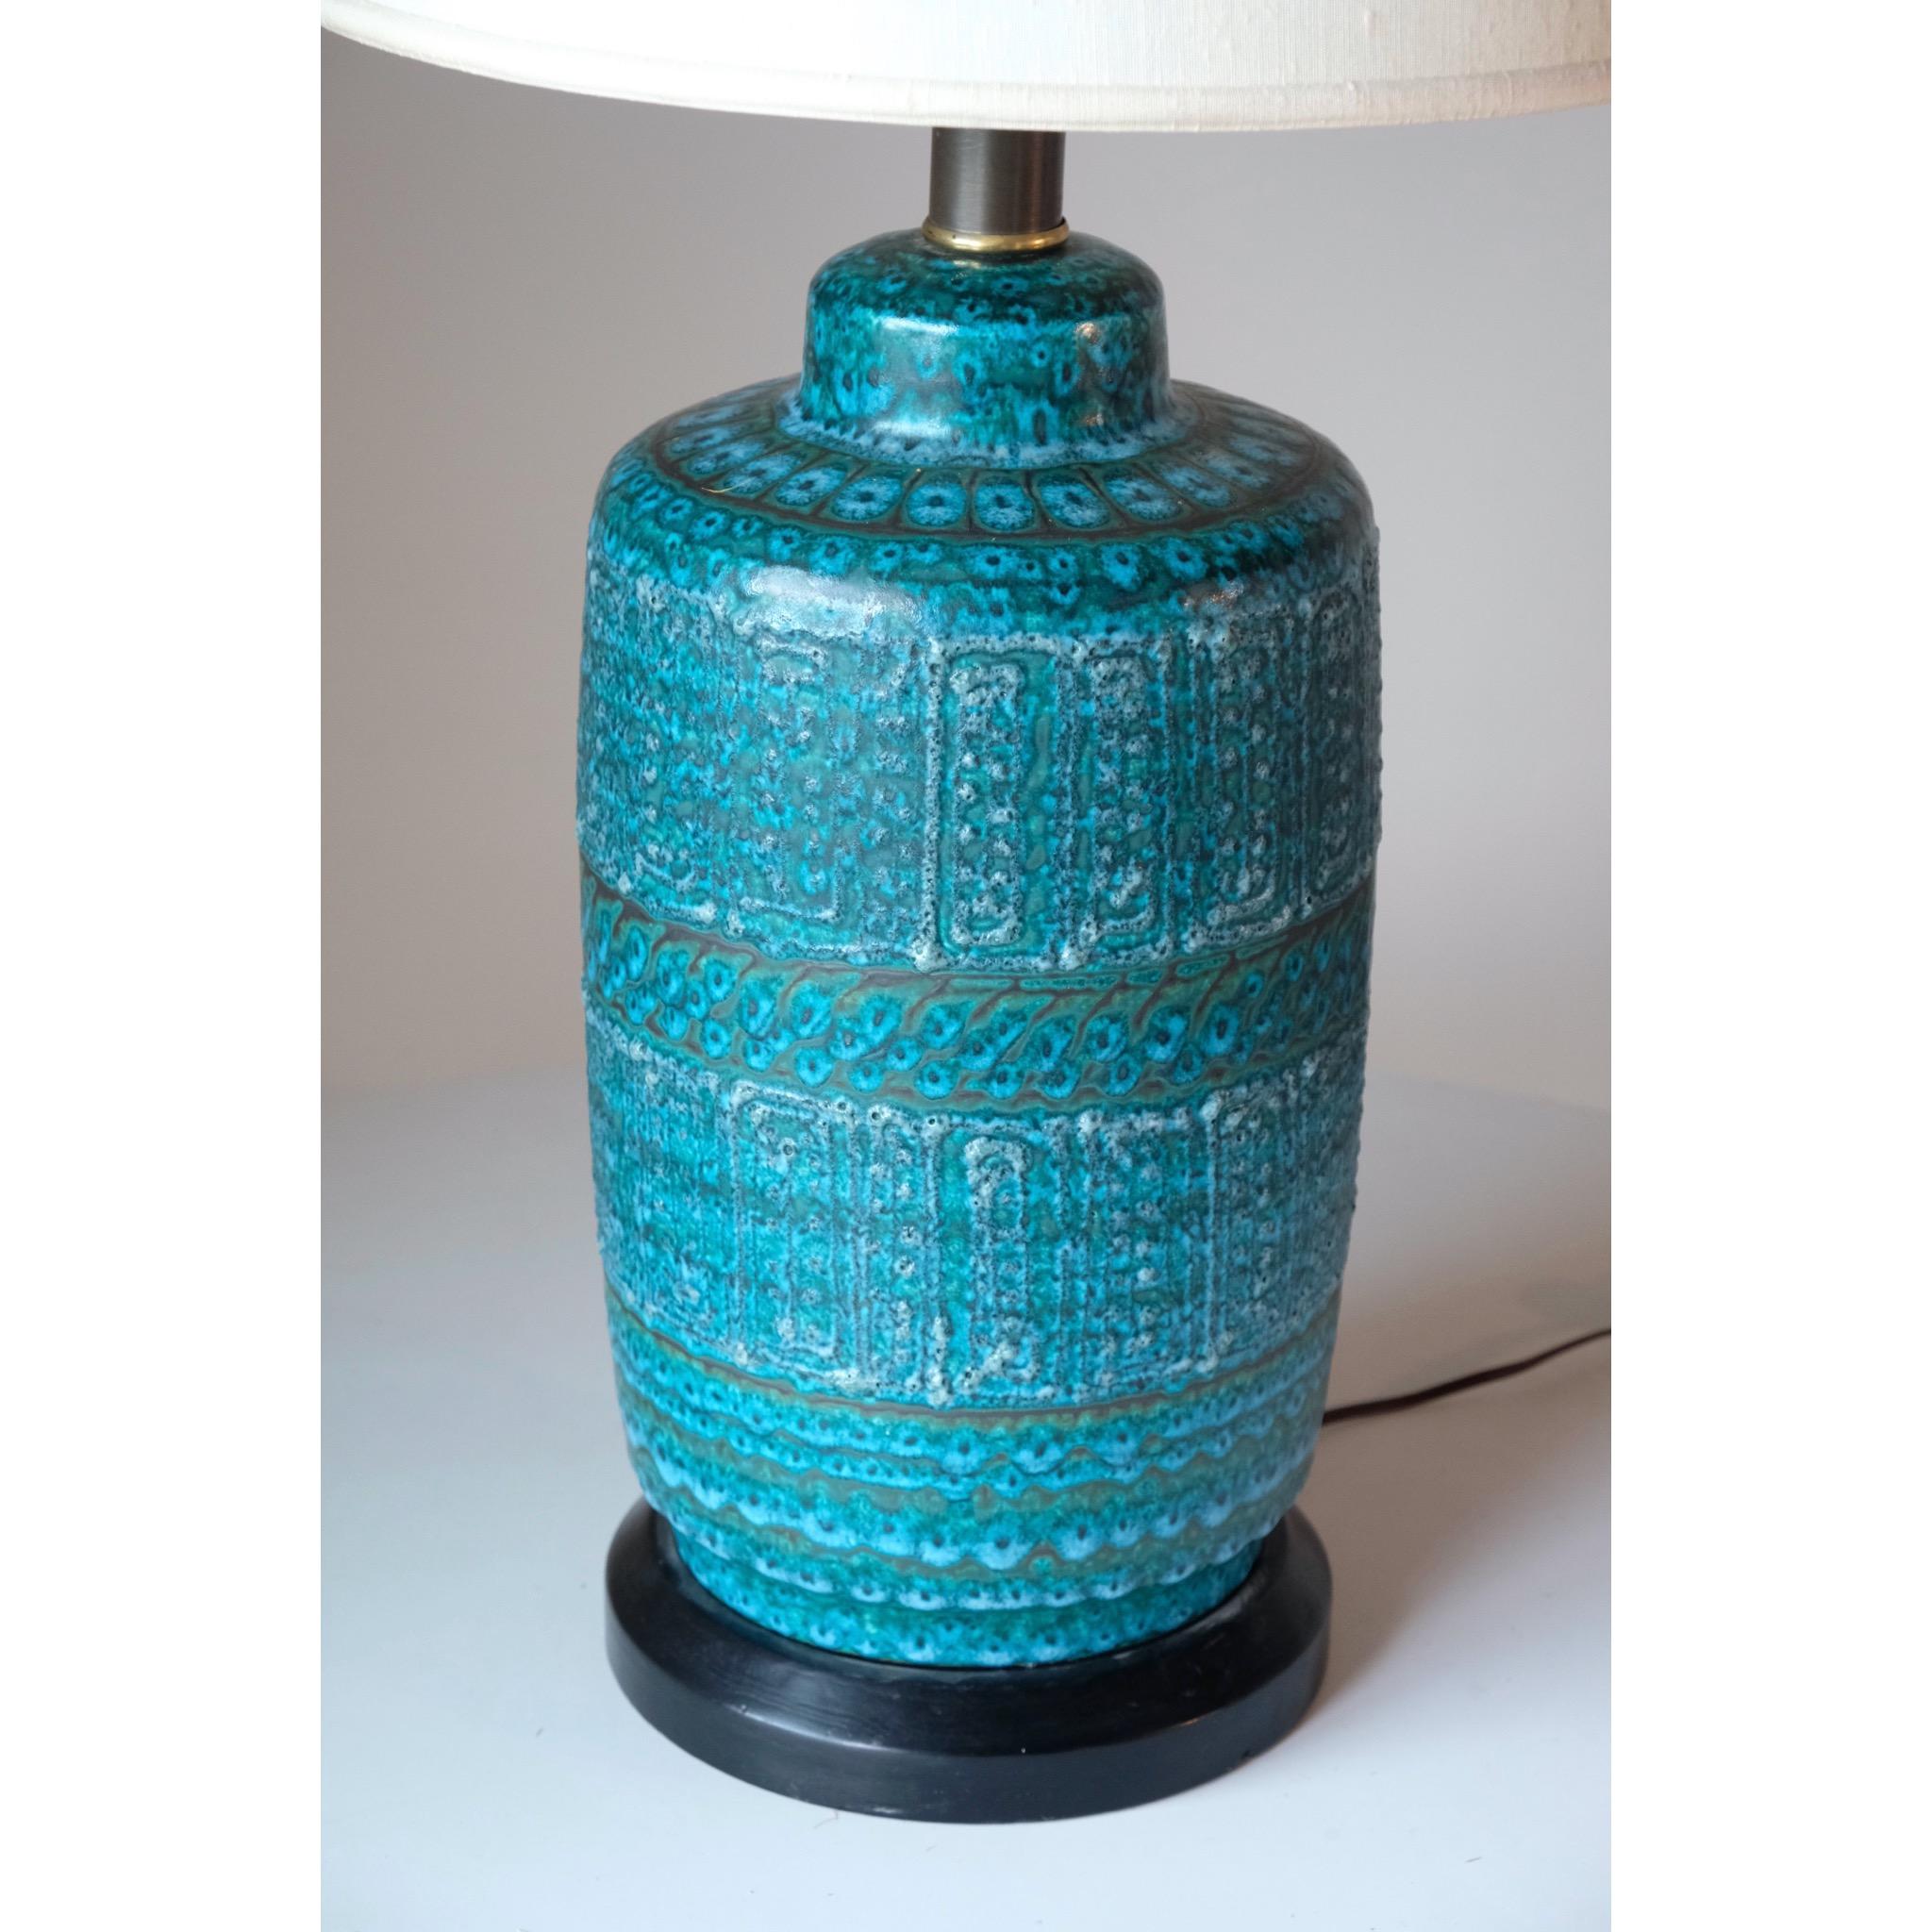 Modernist table lamp designed by Hawaiian ceramicist George Nobuyuki, produced by Sy Allan Designs of California. Beautifully executed blue/green glaze pattern, reminiscent of Bitossi designs. Shade not included unless picked up locally in Los